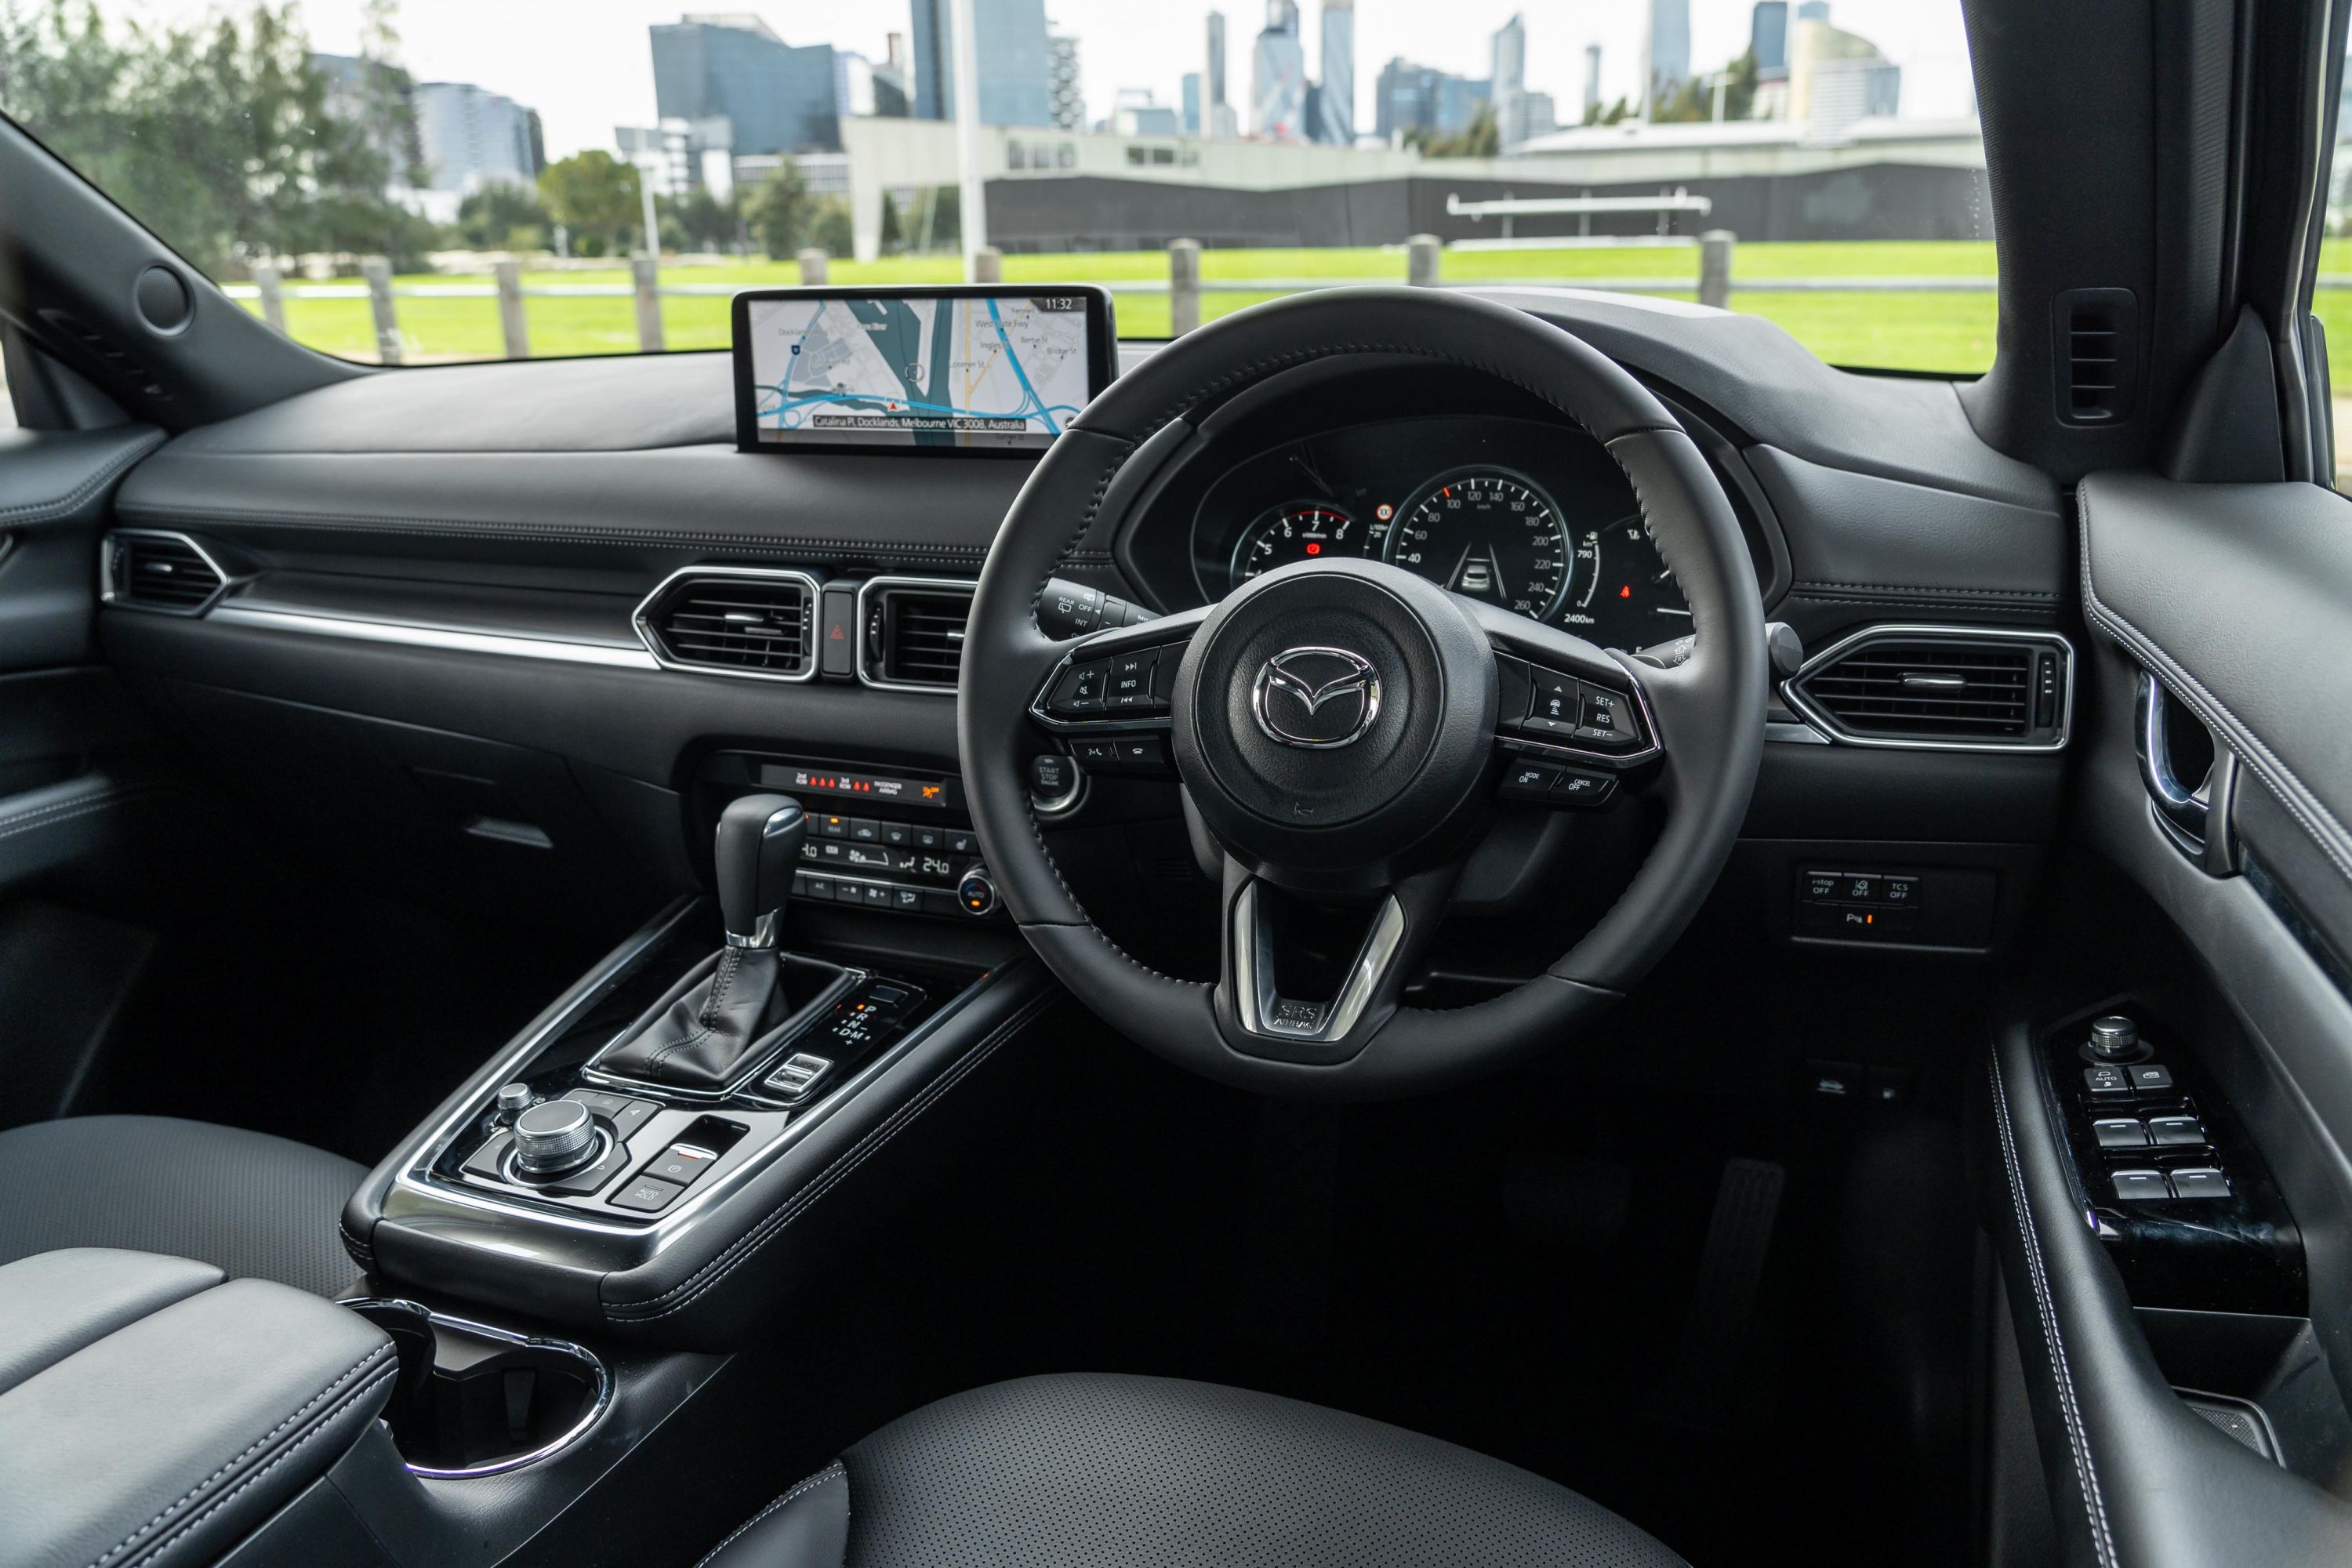 Mazda CX-8 Interior Images & Photos - See the Inside of the Latest